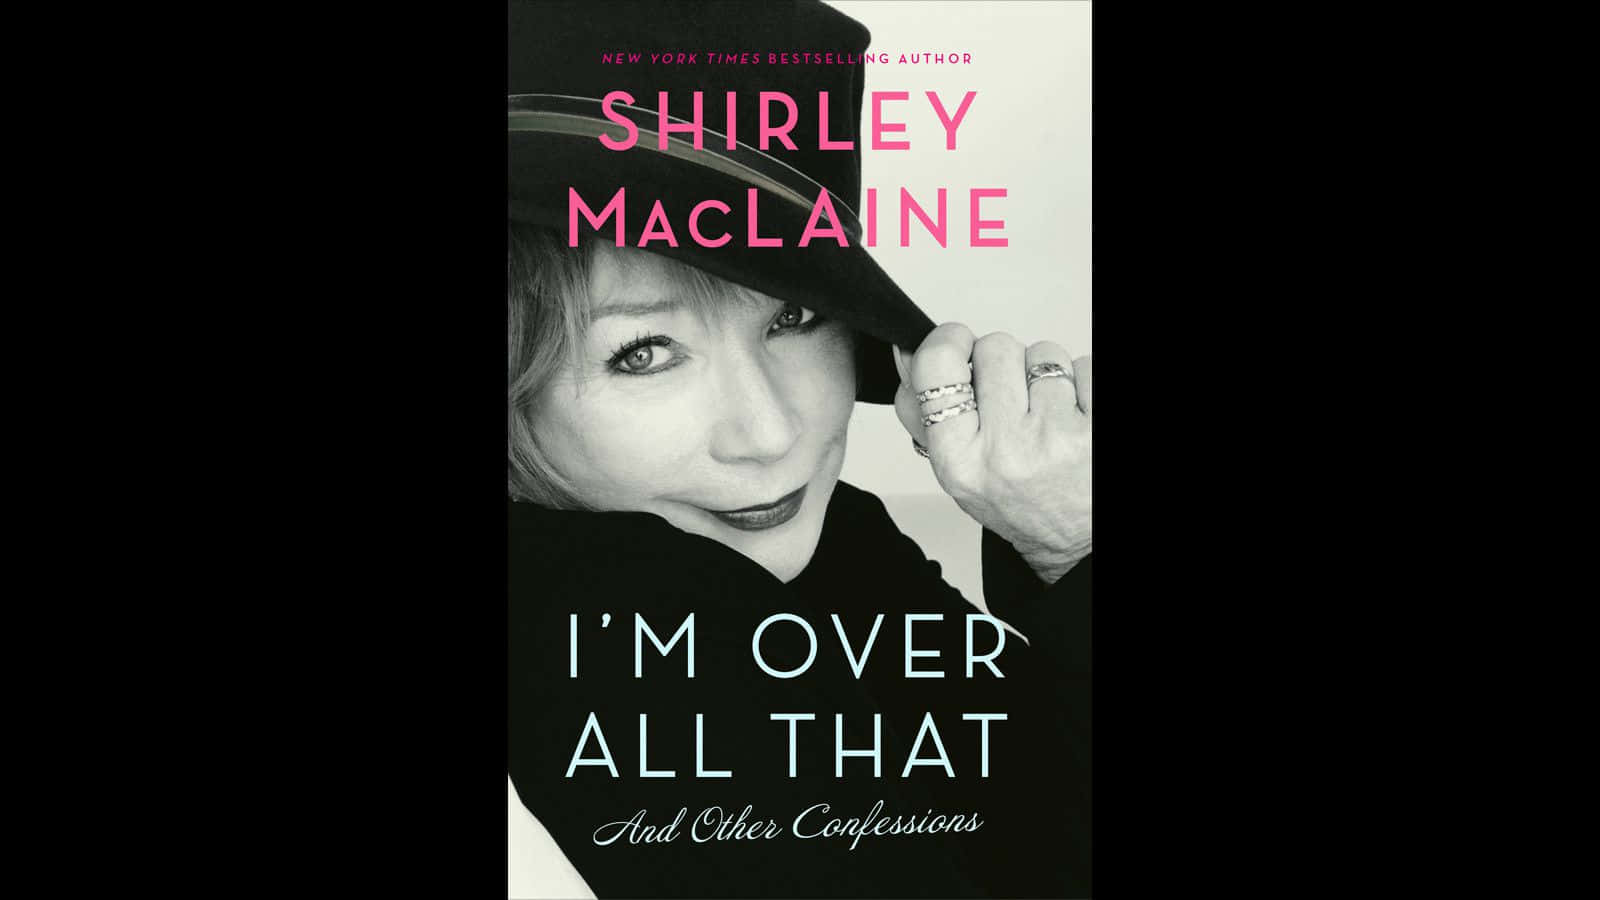 Actress And Author Shirley Maclaine Poses On The Cover Of Her Book 'i'm Over All That'. Wallpaper